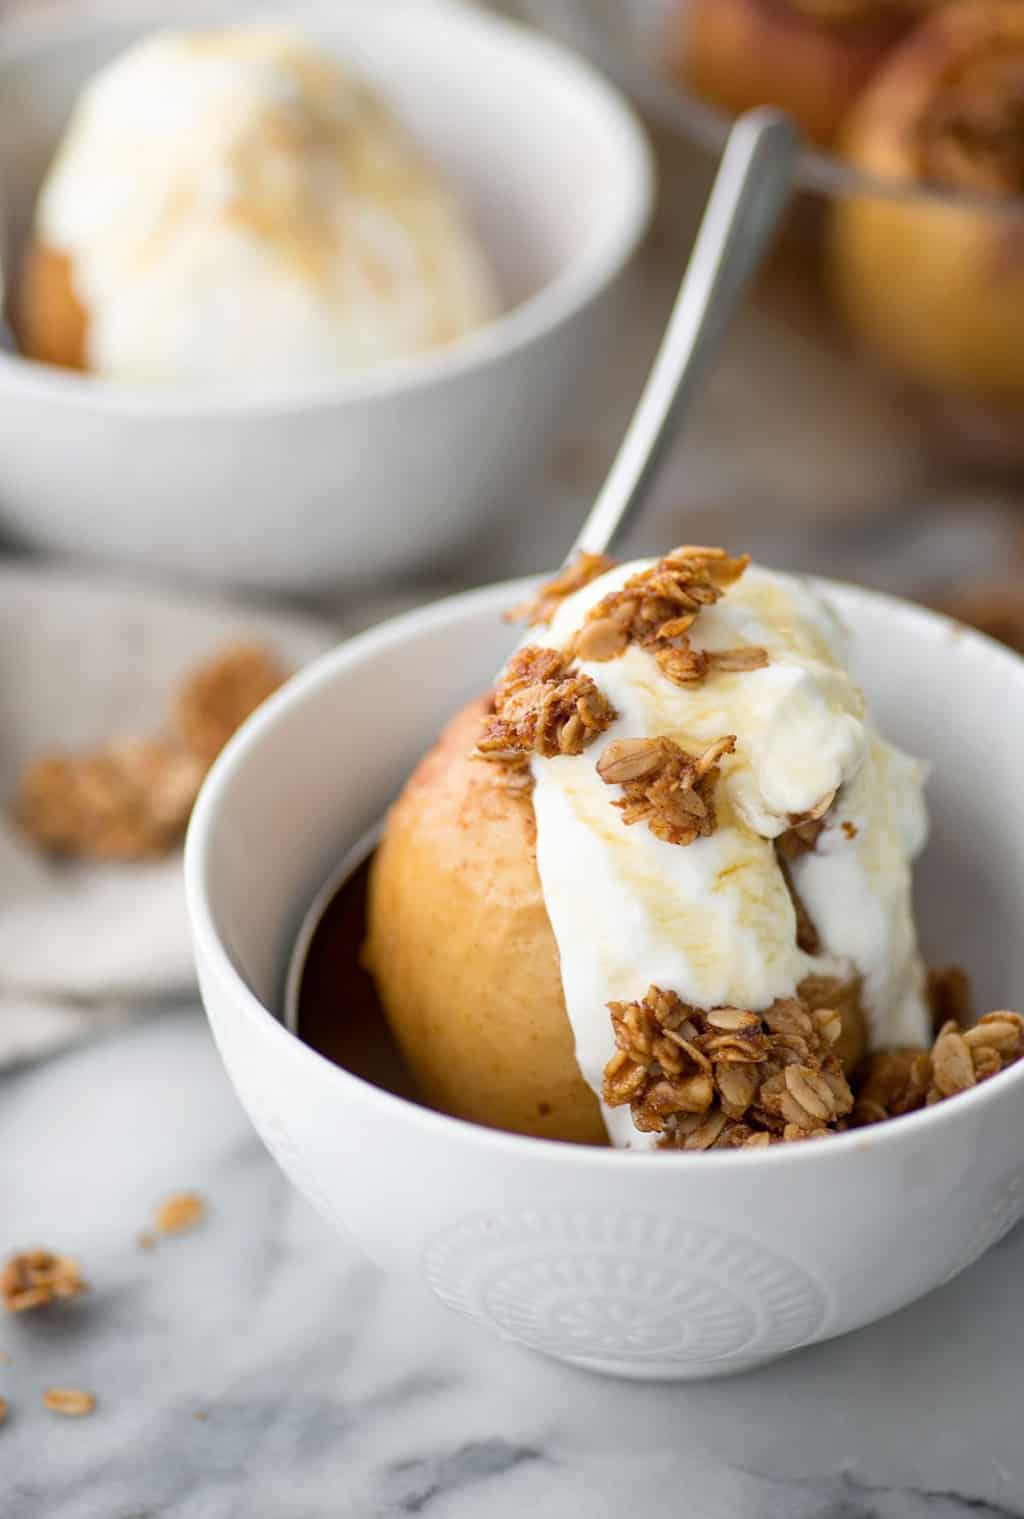 Baked Apples with Spiced Granola and Yogurt - Sugar & Cloth - Houston Blogger - Fall - Recipe